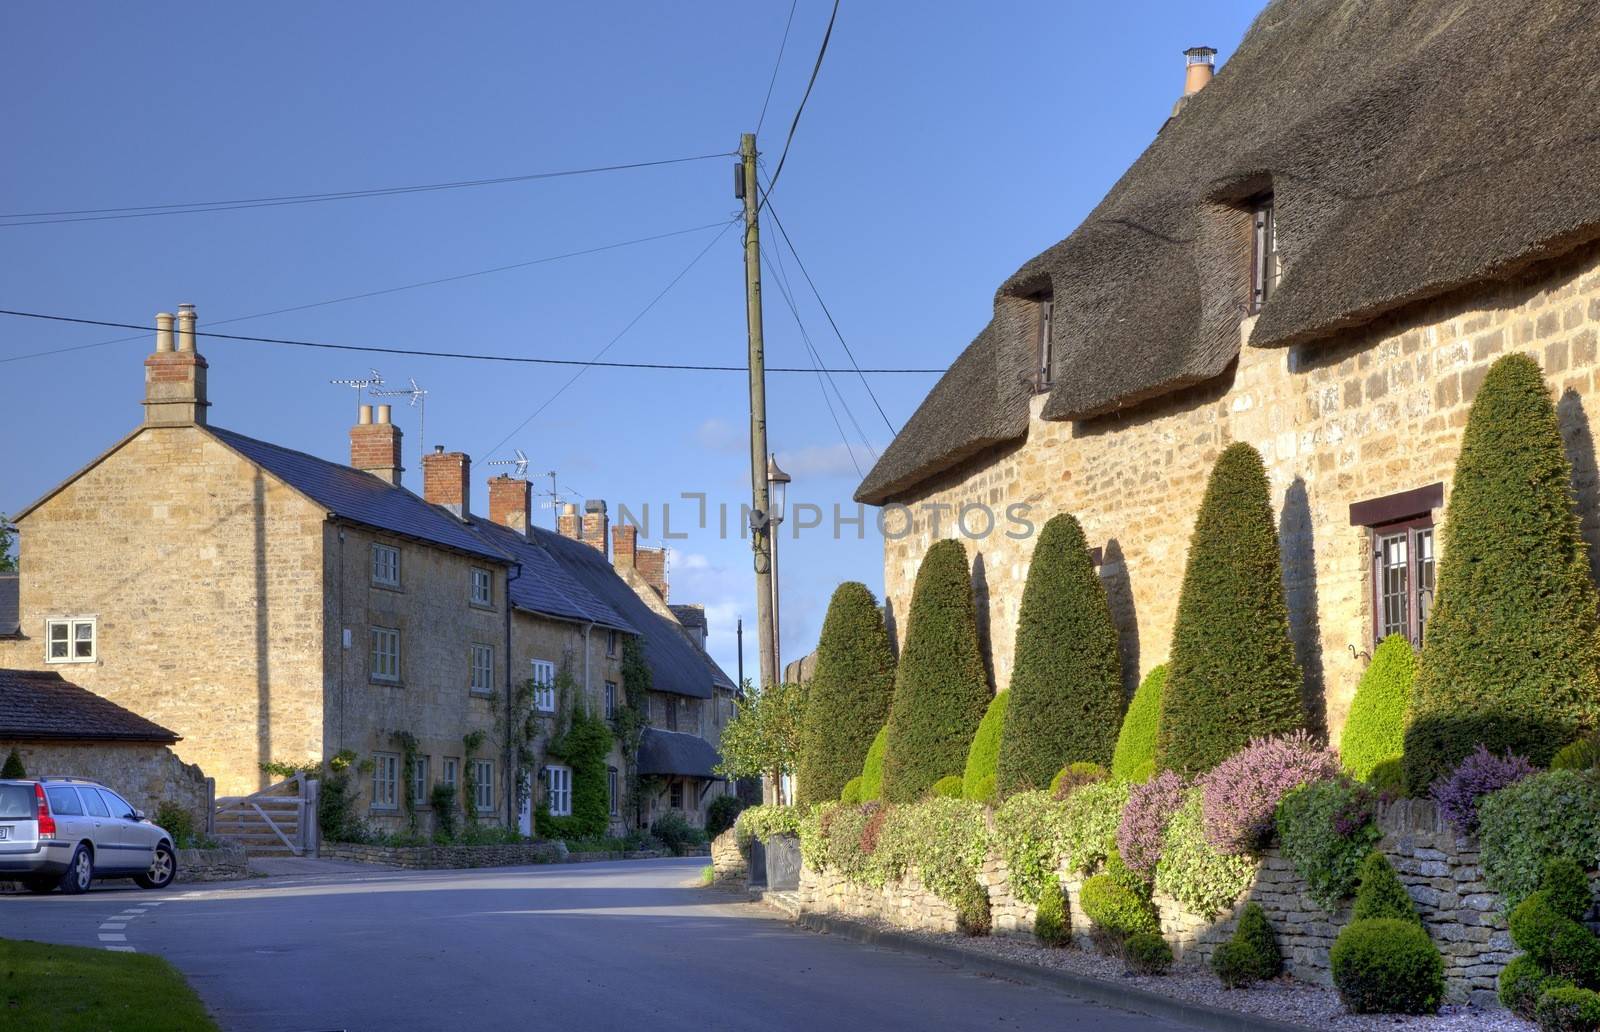 Broad Campden, Cotswolds by andrewroland